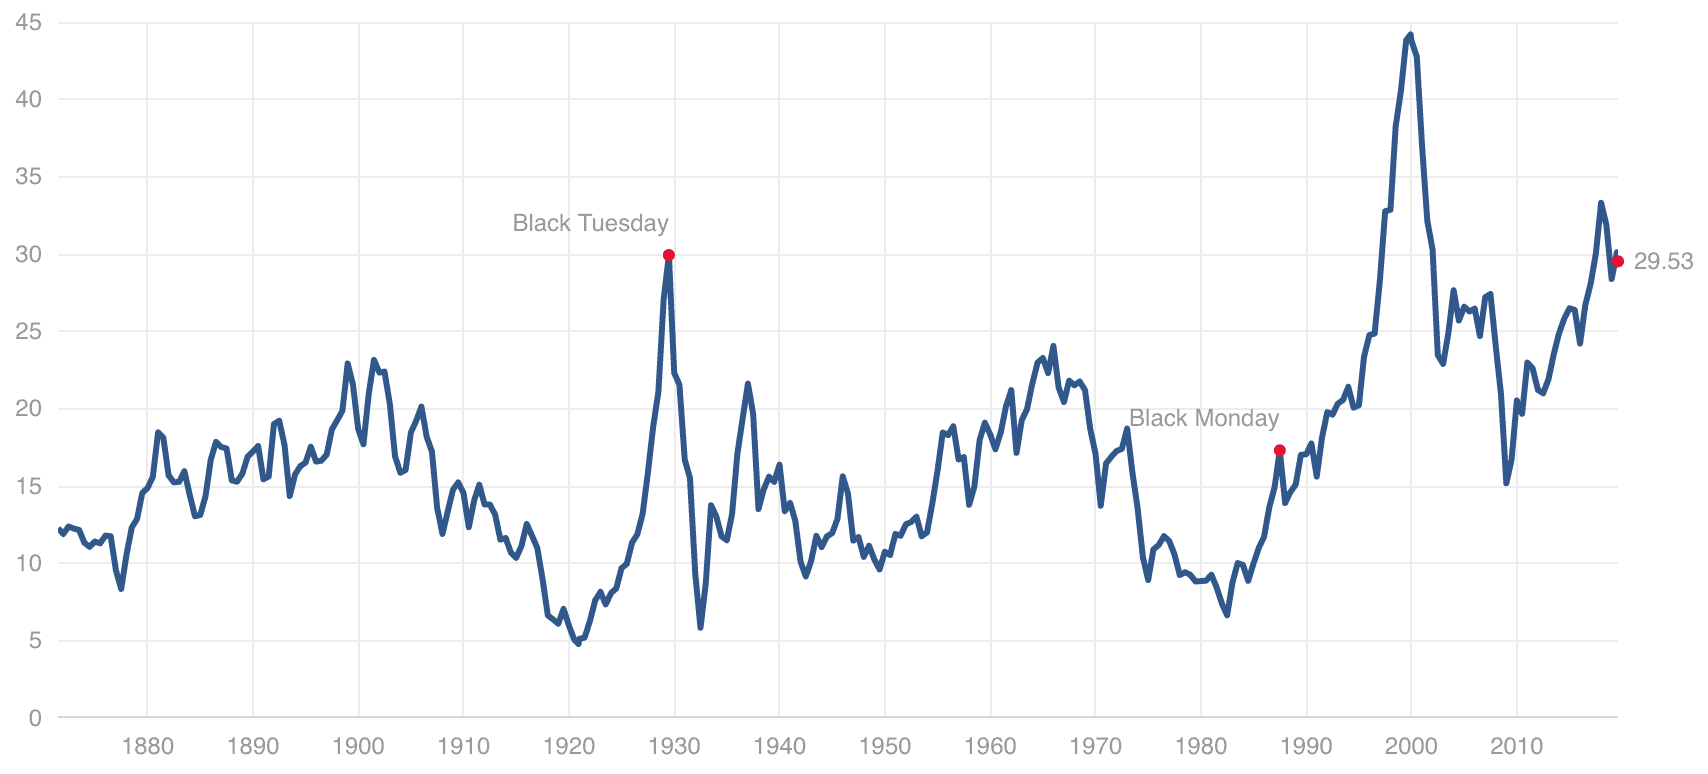 A historical chart of PE ratios